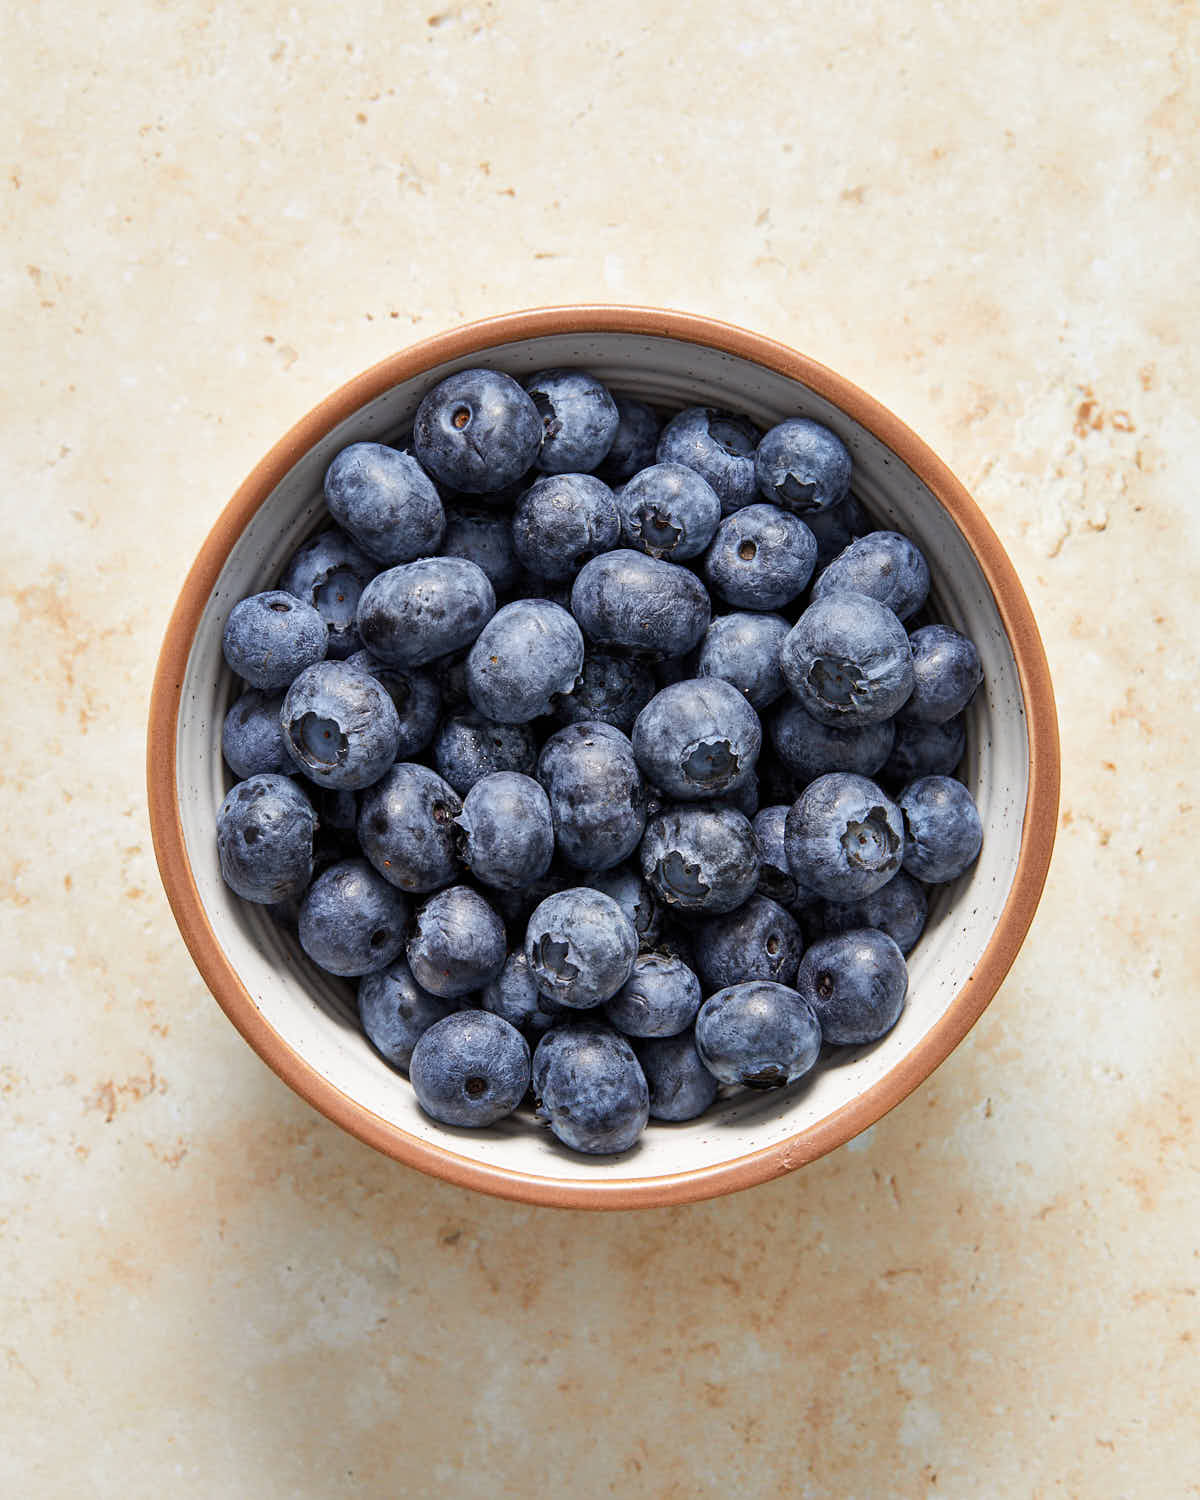 Overhead view of fresh blueberries in a white bowl.